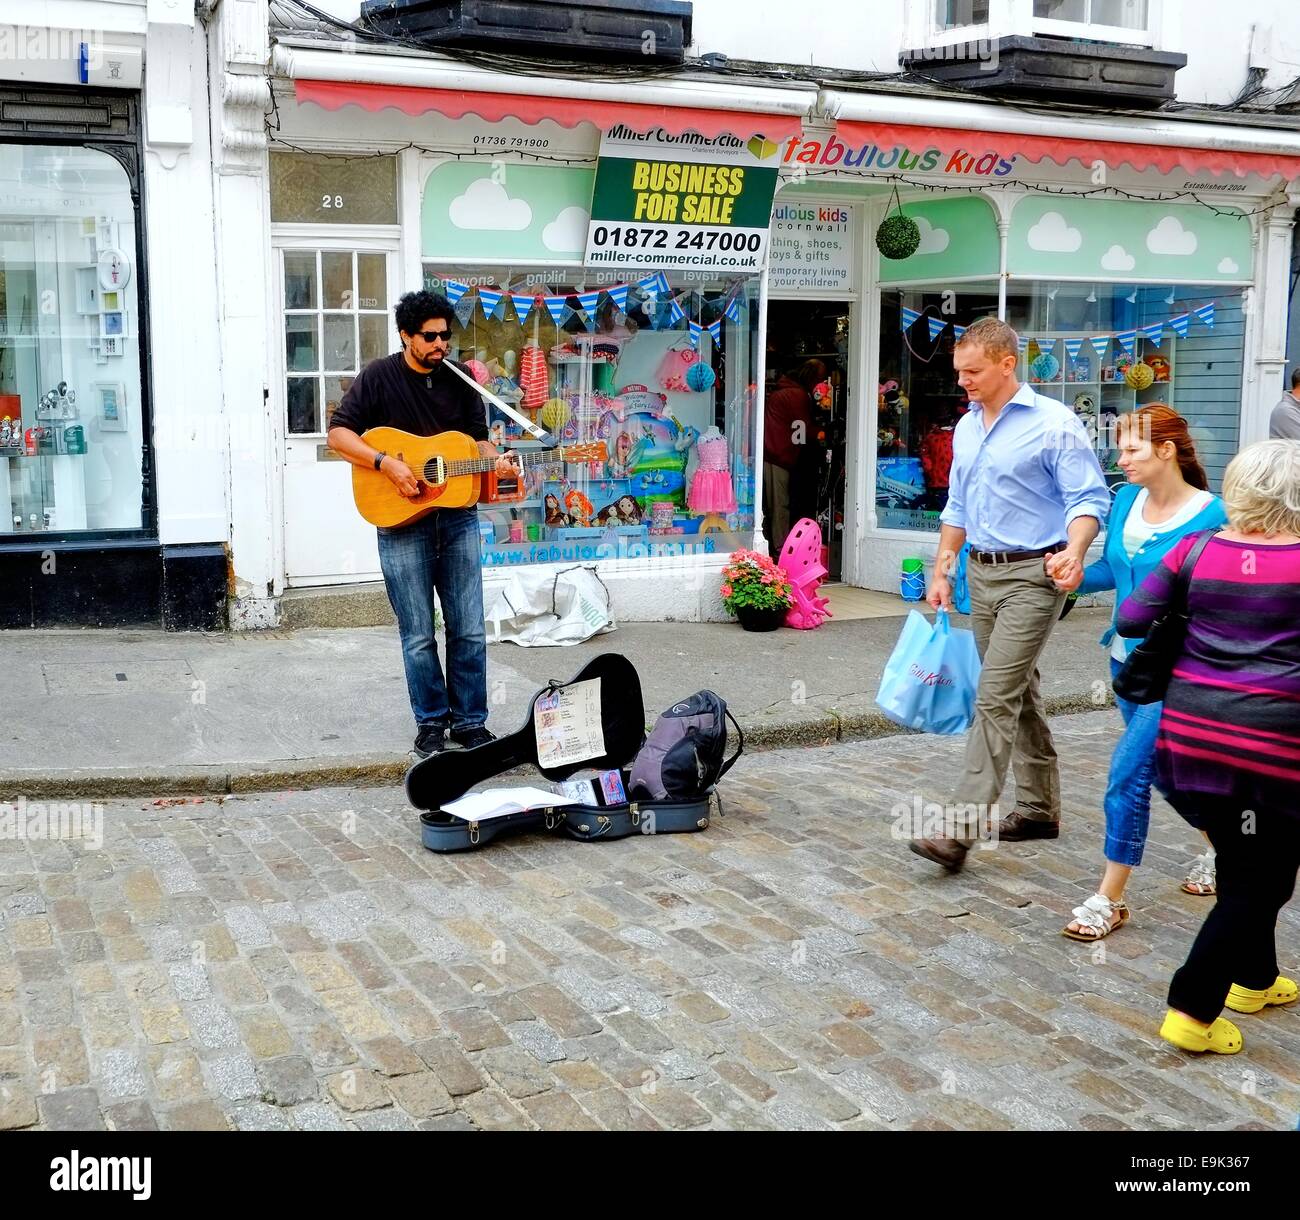 A busker performing in St ives Cornwall england uk Stock Photo